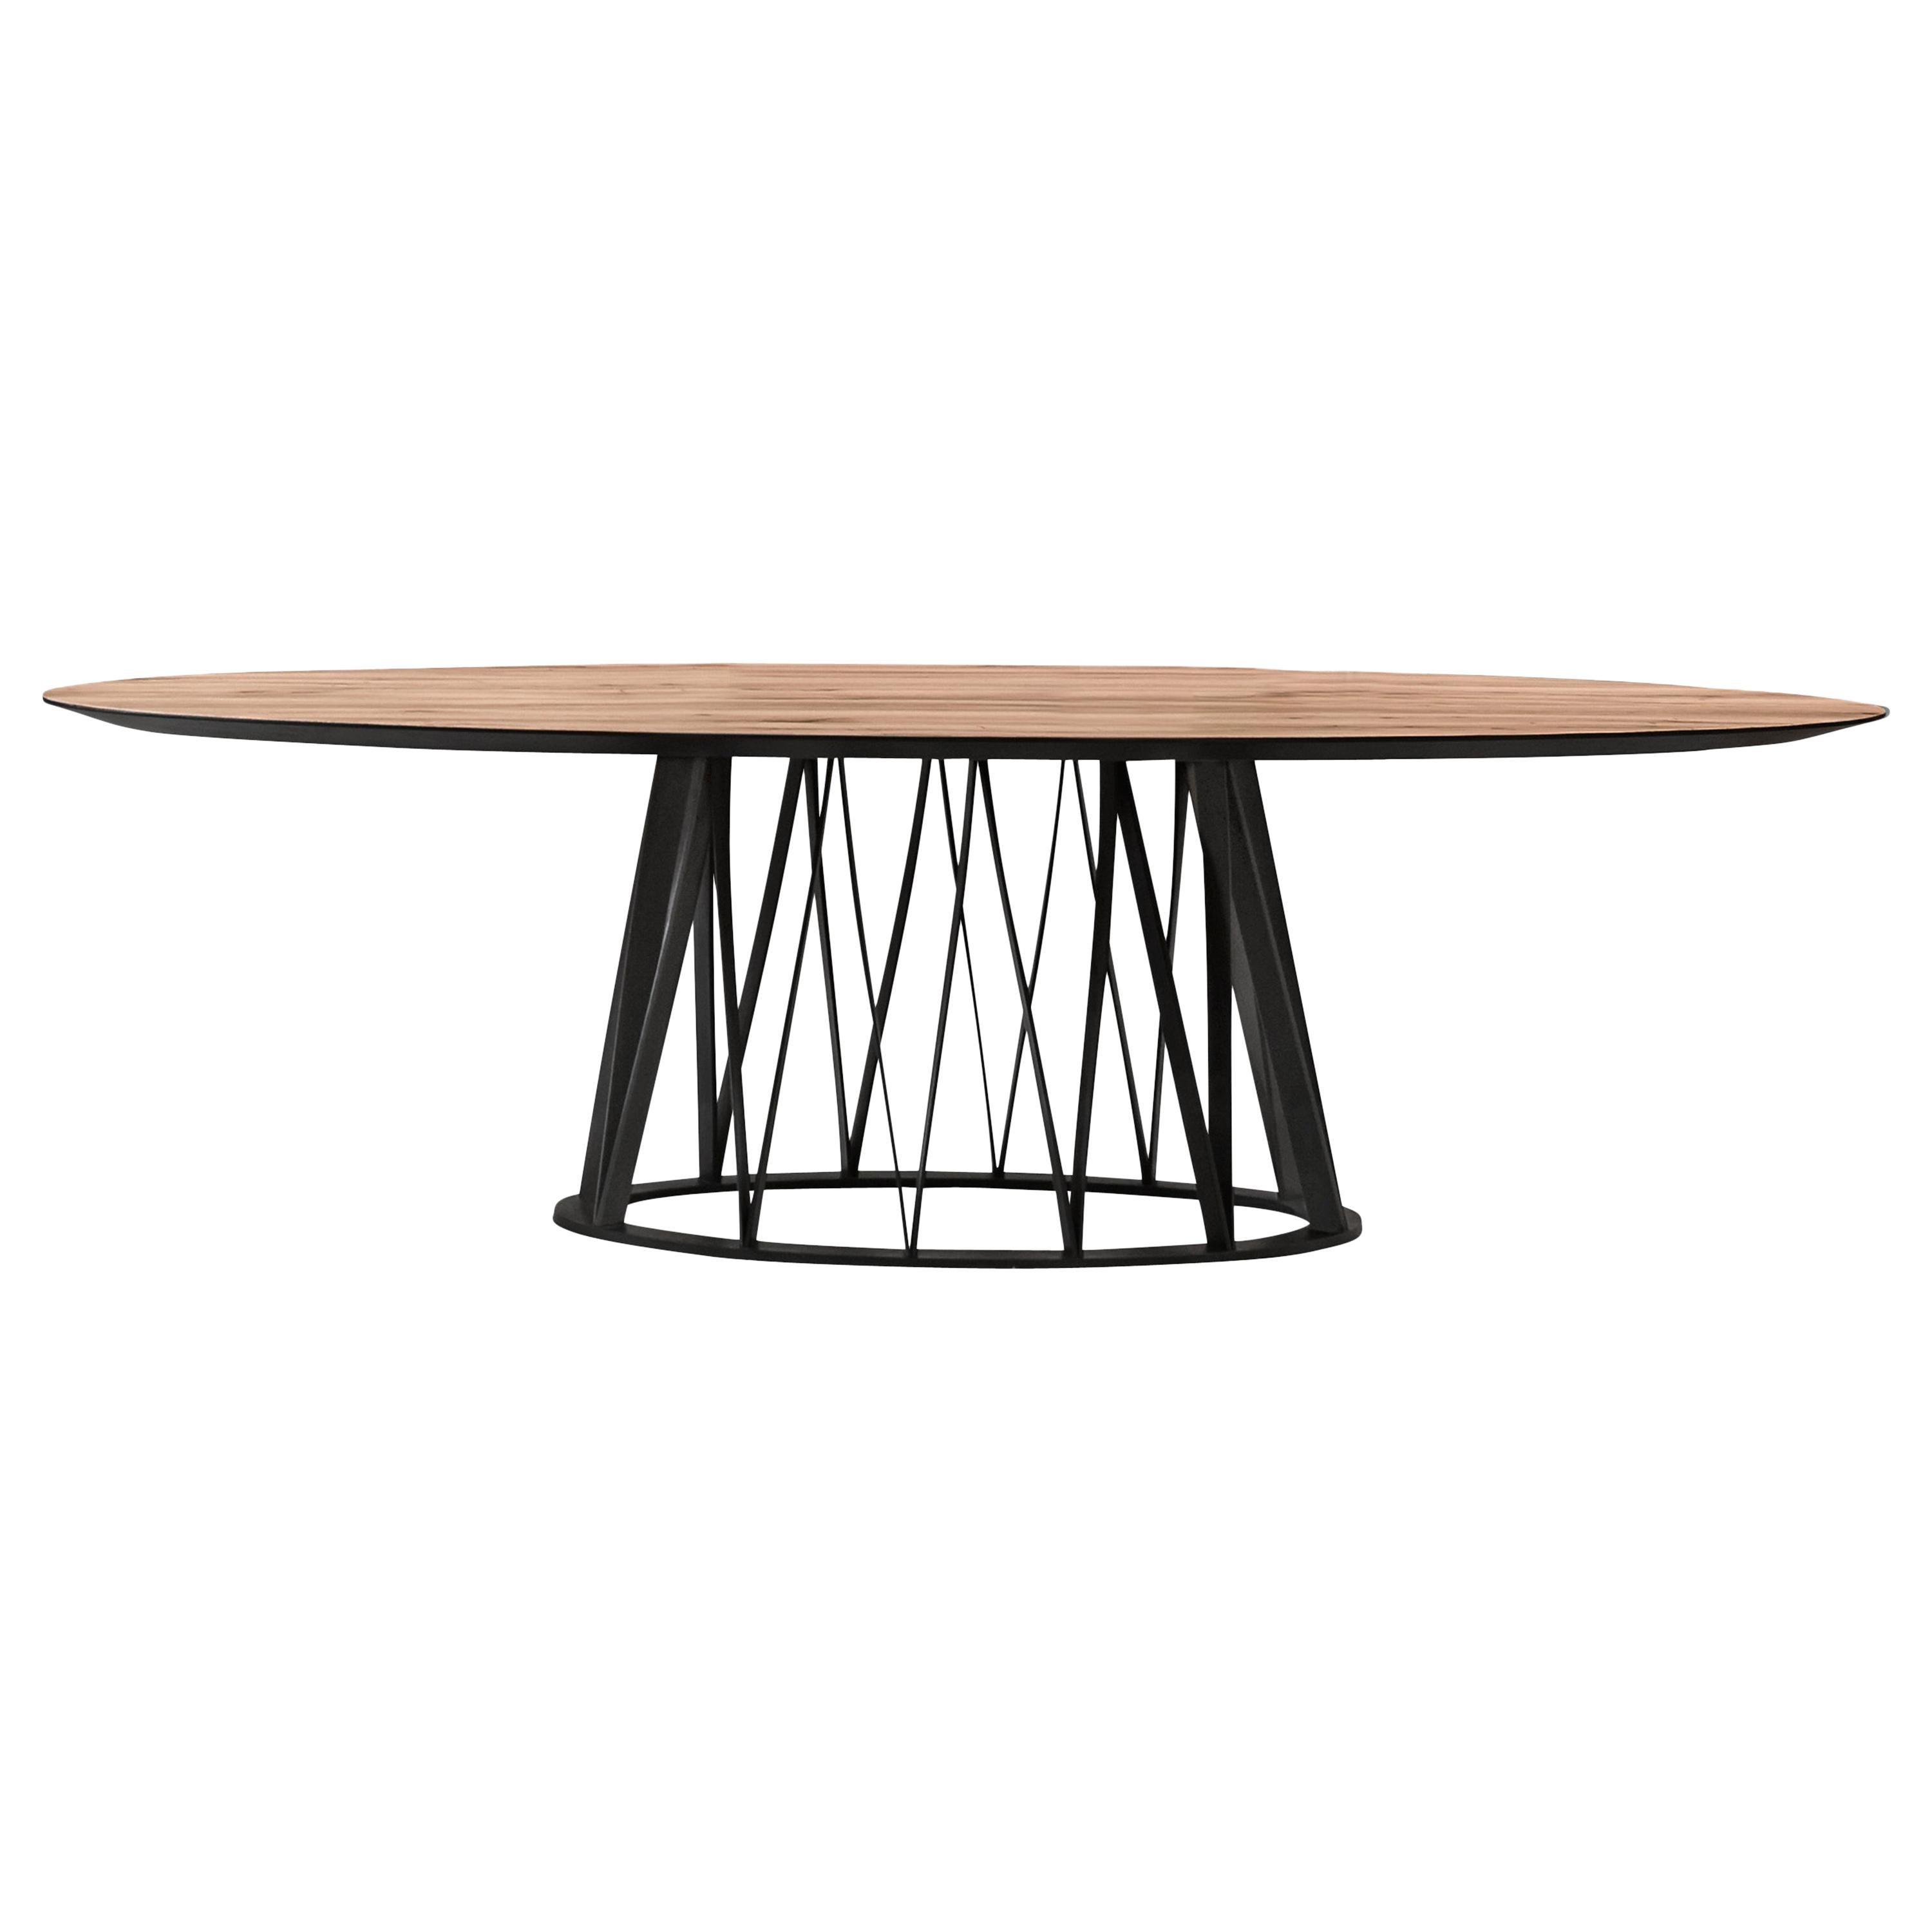 Acco Large Dining Table in Black Ash Base Finish, by Florian Schmid